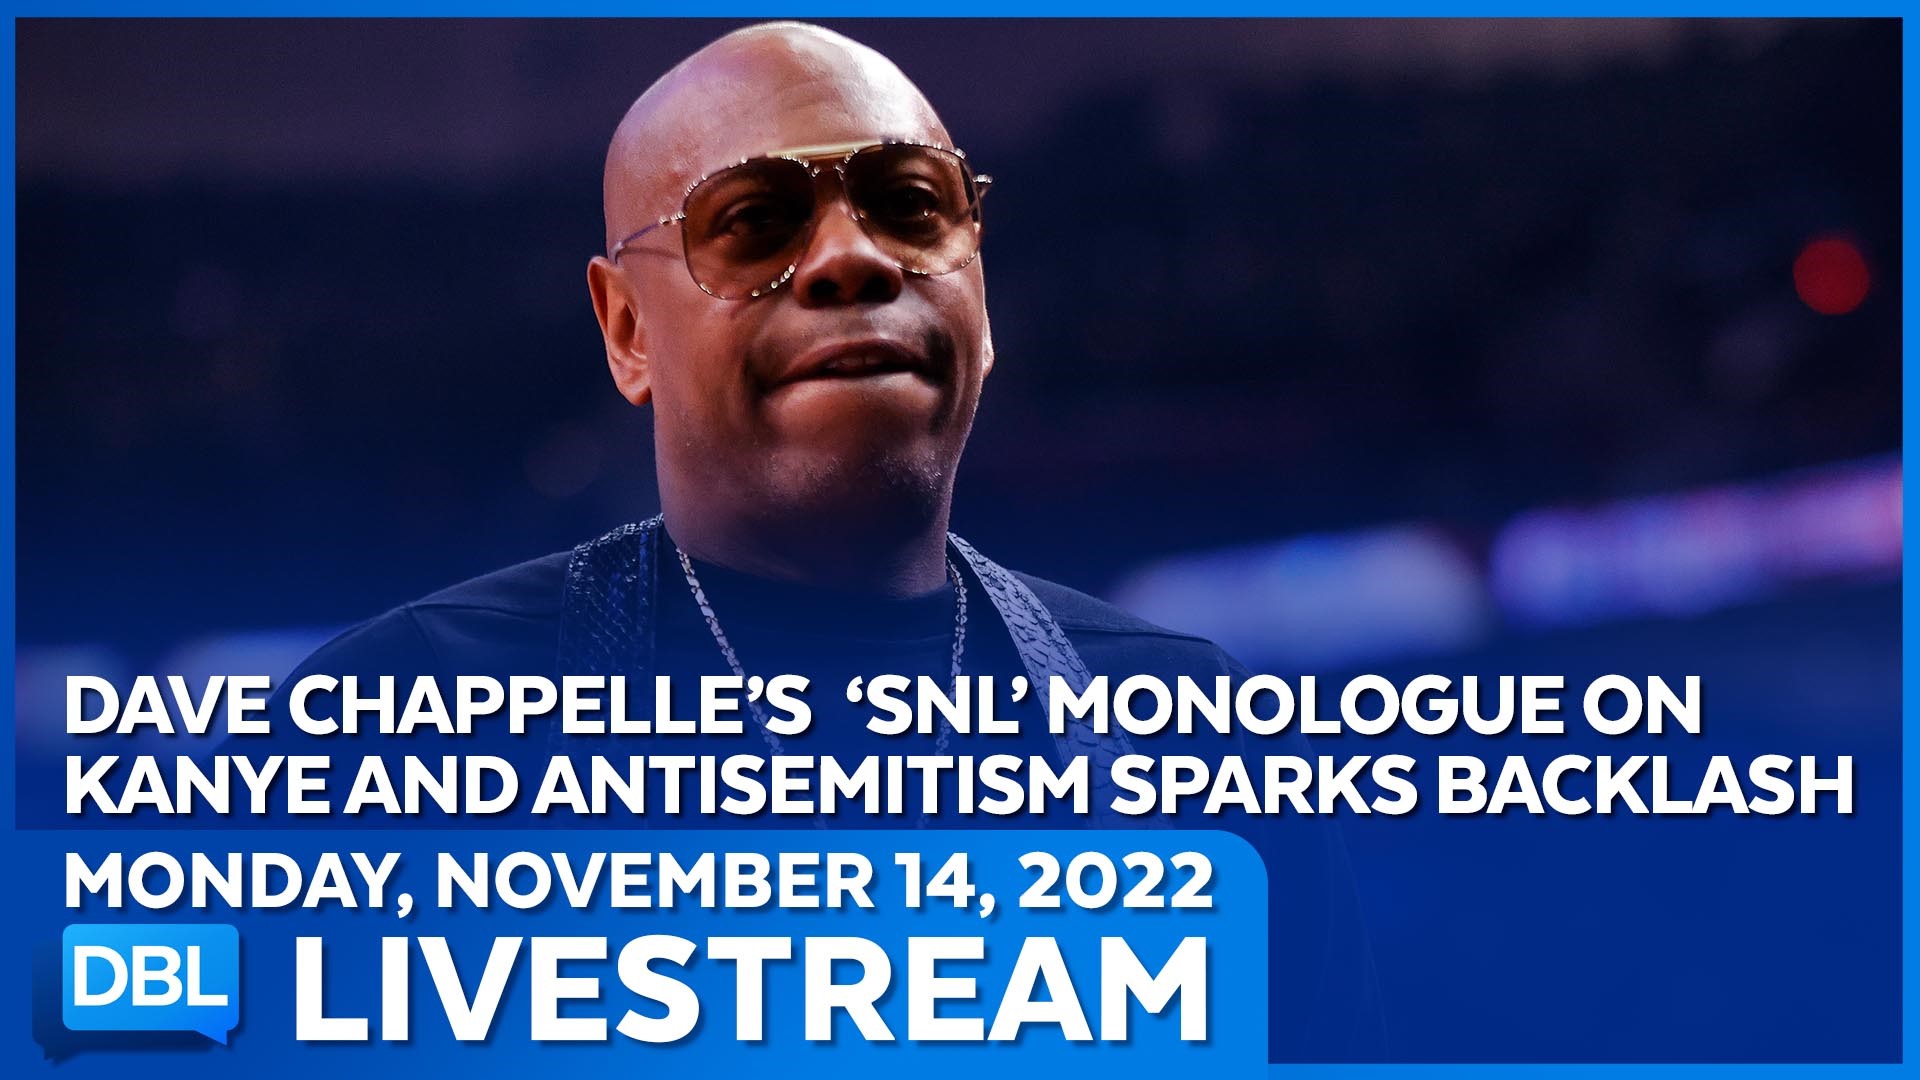 Dave Chappelle's 'SNL' monologue on Kanye & antisemitism sparks backlash; Former Vice President Pence says Trump endangered lives; DBL remembers actor John Aniston.